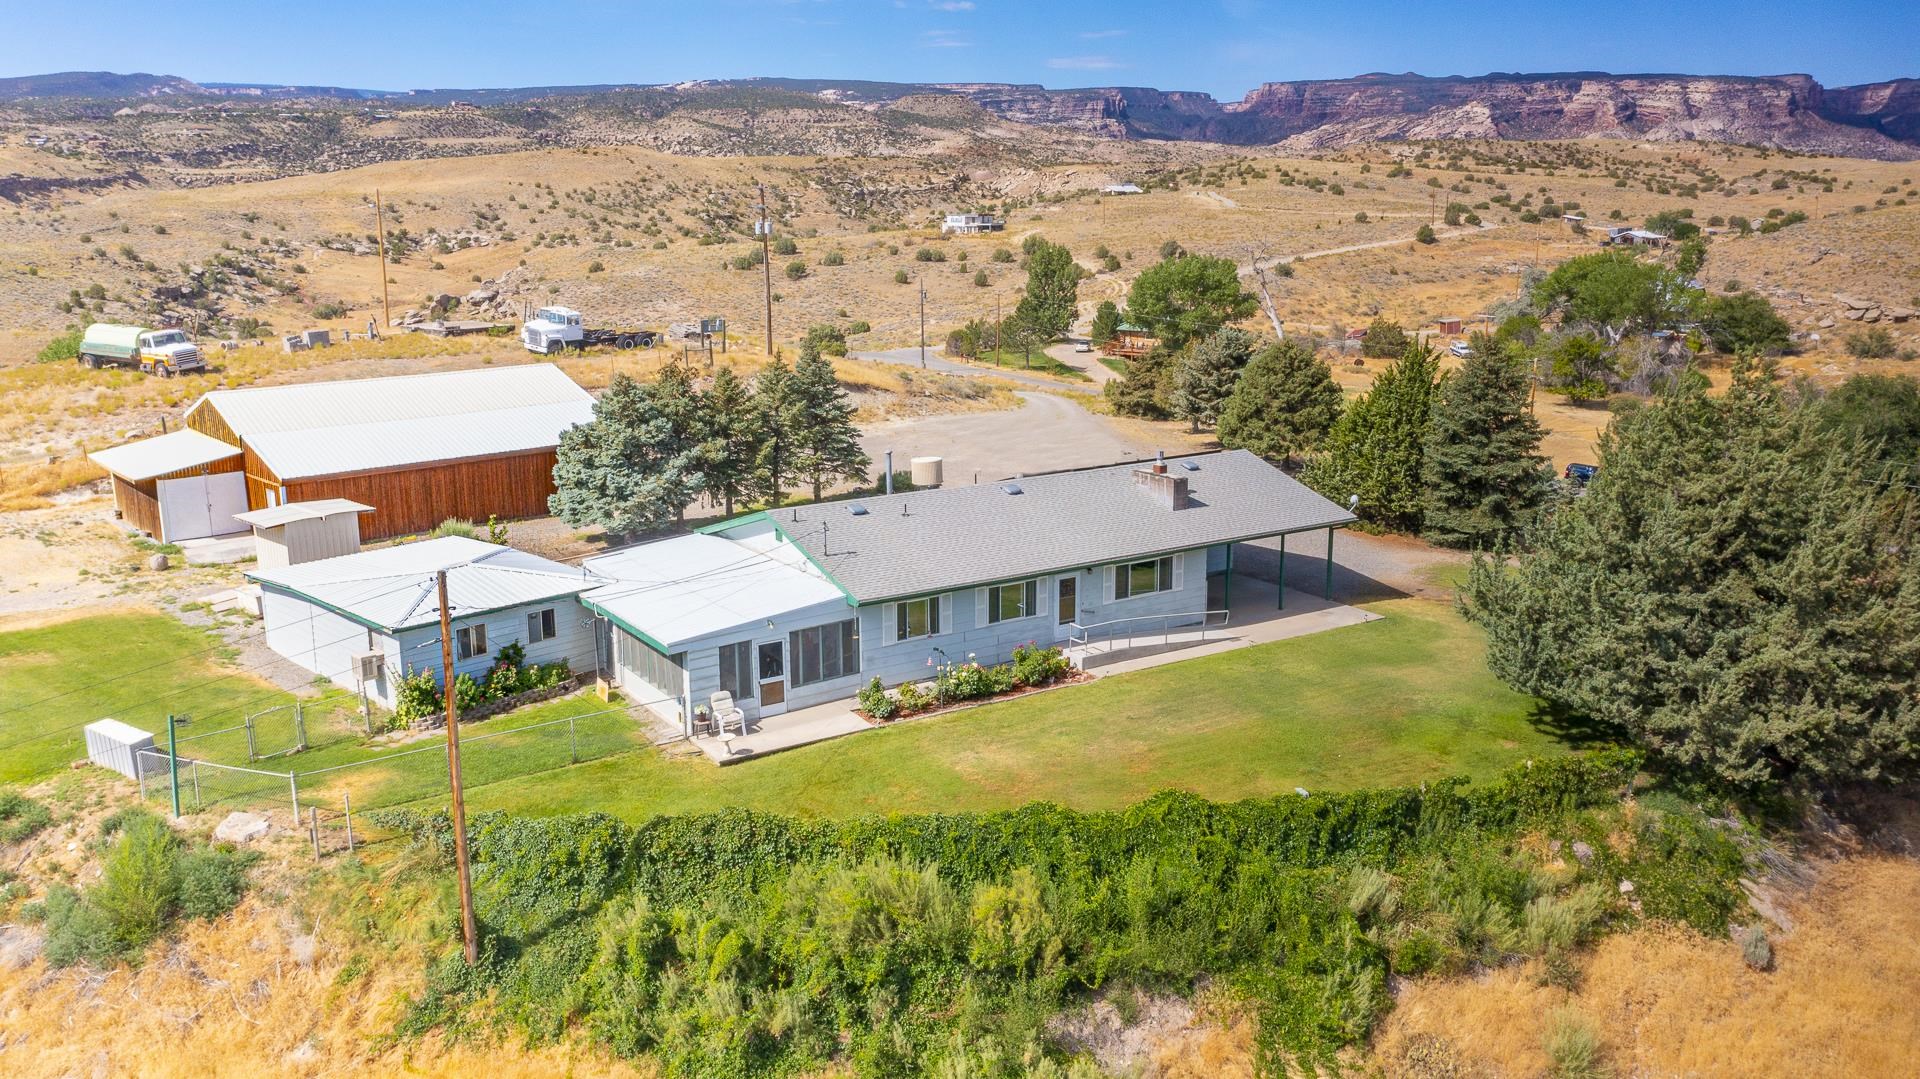 This is the rare Redlands gem you've been waiting for! Perched on its own private plateau above the Grand Valley, this home epitomizes Western Colorado lifestyle at its finest. If you're looking for close proximity to recreation, take a short 2 minute bike ride out of your front door to the end of Mira Monte Road. You'll find yourself at the Lunch Loops Trail System, one of the most popular trail networks in the Grand Valley. Direct access to this trail system is something that doesn't come available often! Only a five minute drive will also take you to the heart of Main Street. This location truly offers the best of both worlds. If you need room for toys and hobbies, you'll find a large 48 X 37 barn, large enough to store RV's, one-car garage, carport and two additional workshop areas. The tranquil grounds are also sprinkled with evergreen trees, grassy lawn areas, and an amazing covered patio. This is the perfect basecamp for anyone who loves recreation or perfect for someone looking for their private hilltop abode up above the stunning backdrop of the Grand Valley. The well-maintained home itself is highlighted by a functional floorpan with spacious living areas, a fireplace and plenty of windows. Offering some of the most incredible views in Grand Junction, ample amenities, privacy and space, all nestled in the perfect location, you won't want to miss out on this opportunity!